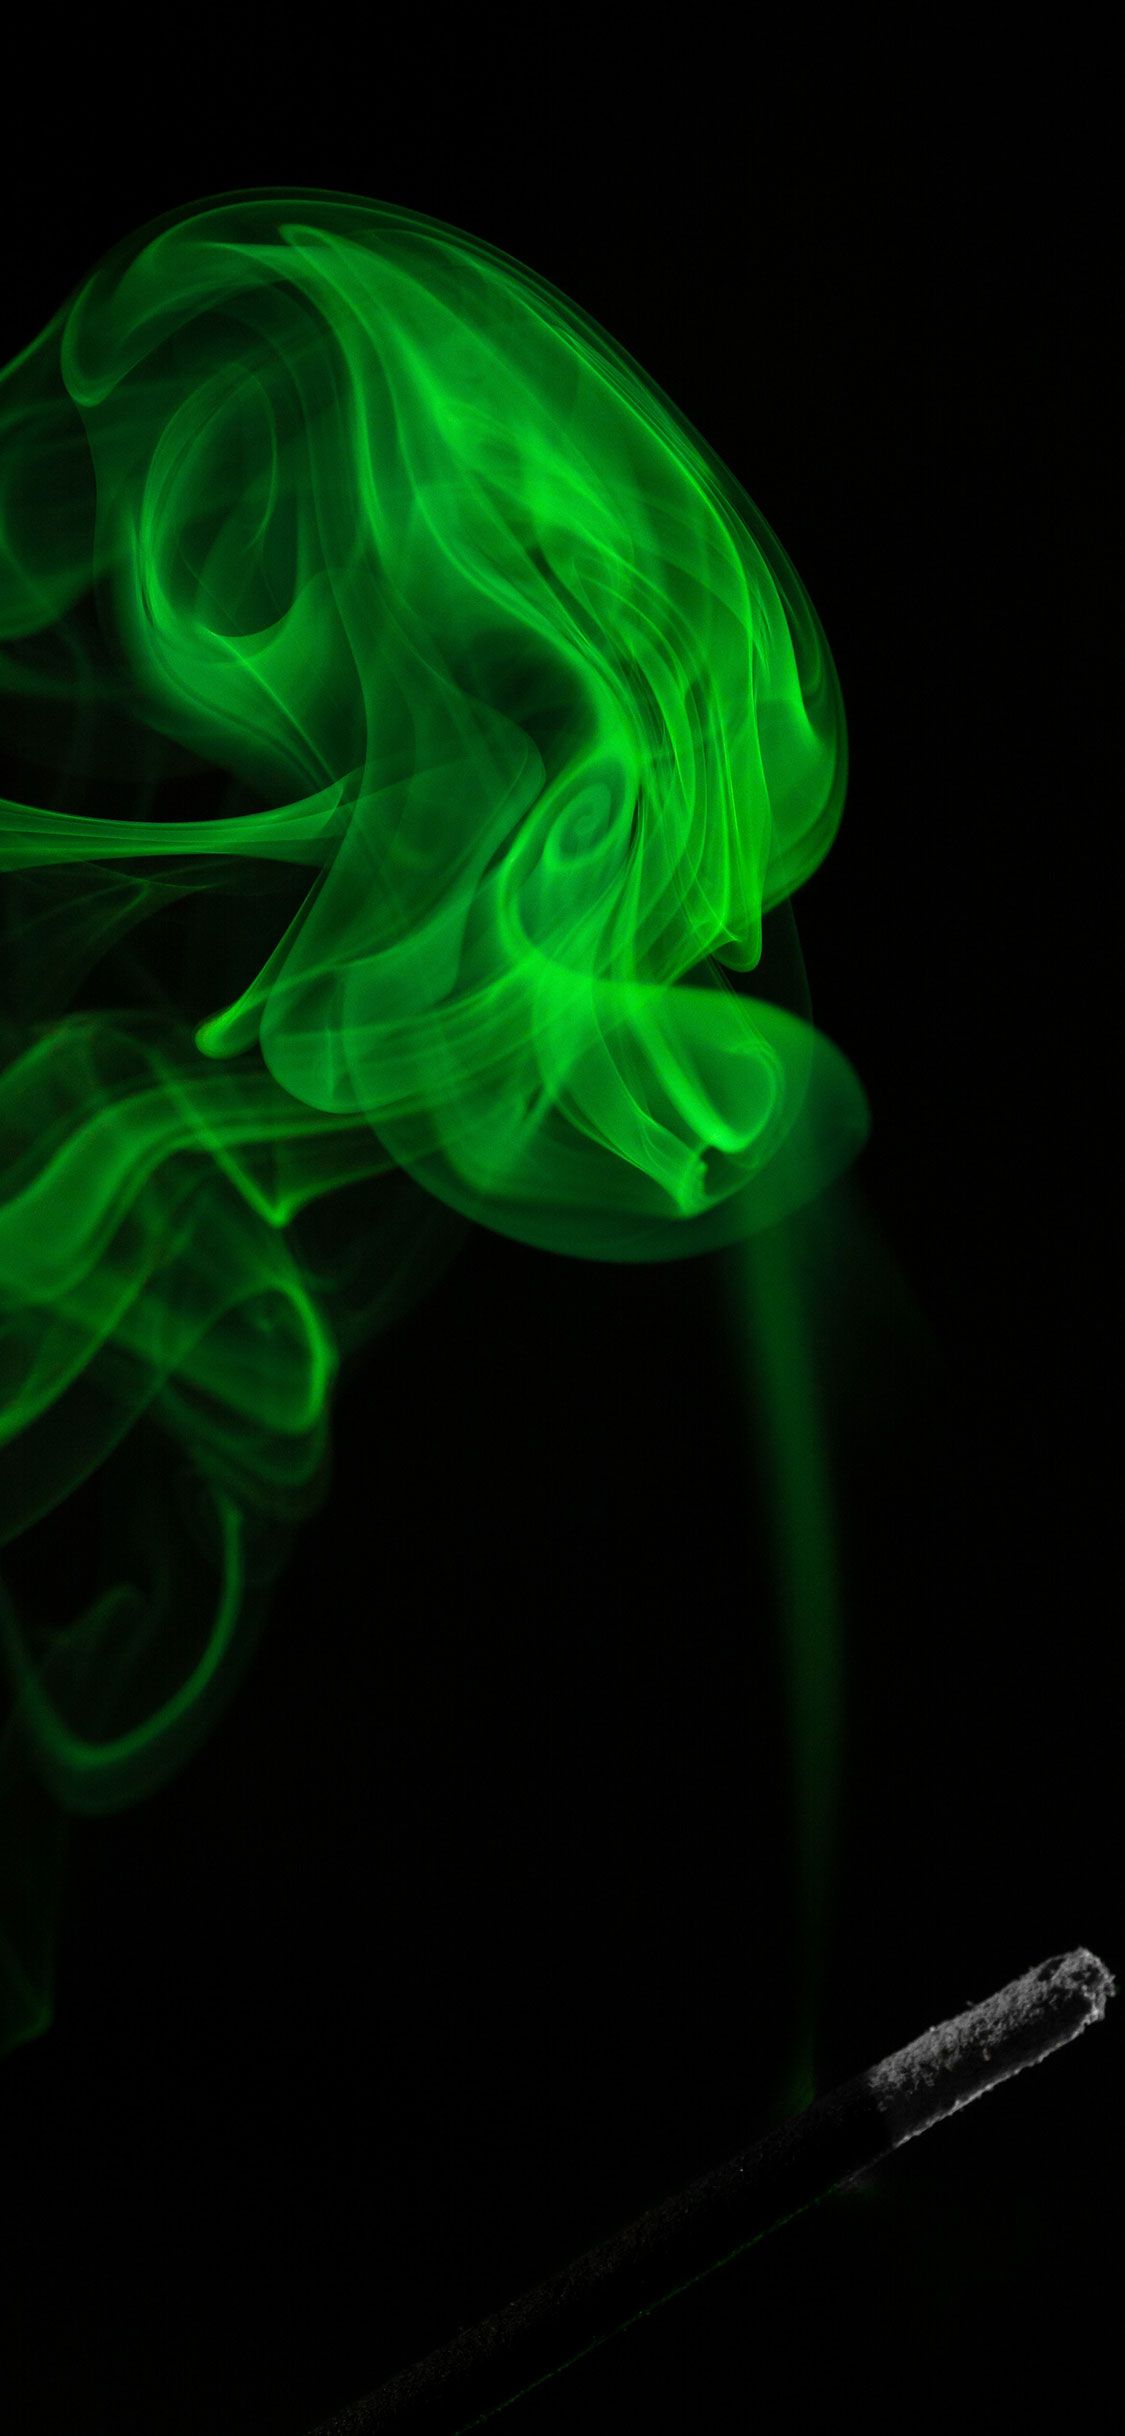 Smoke Wallpaper for iPhone Pro Max, X, 6